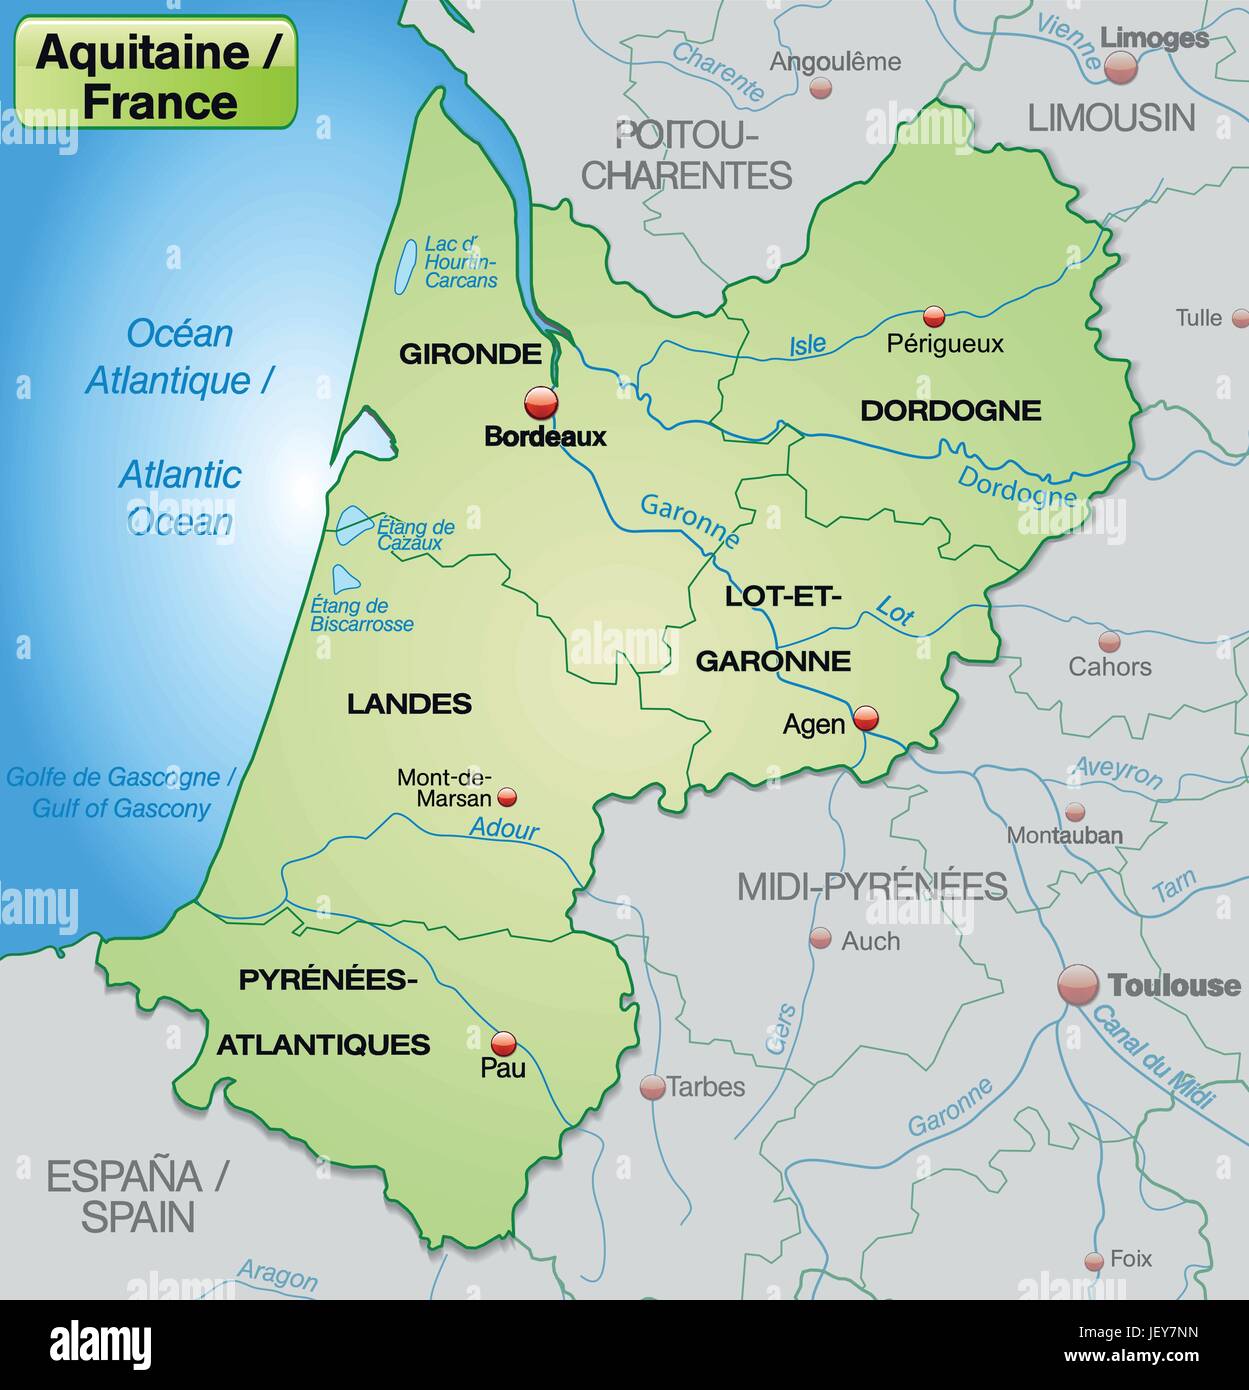 map of aquitaine with borders in pastel green Stock Vector